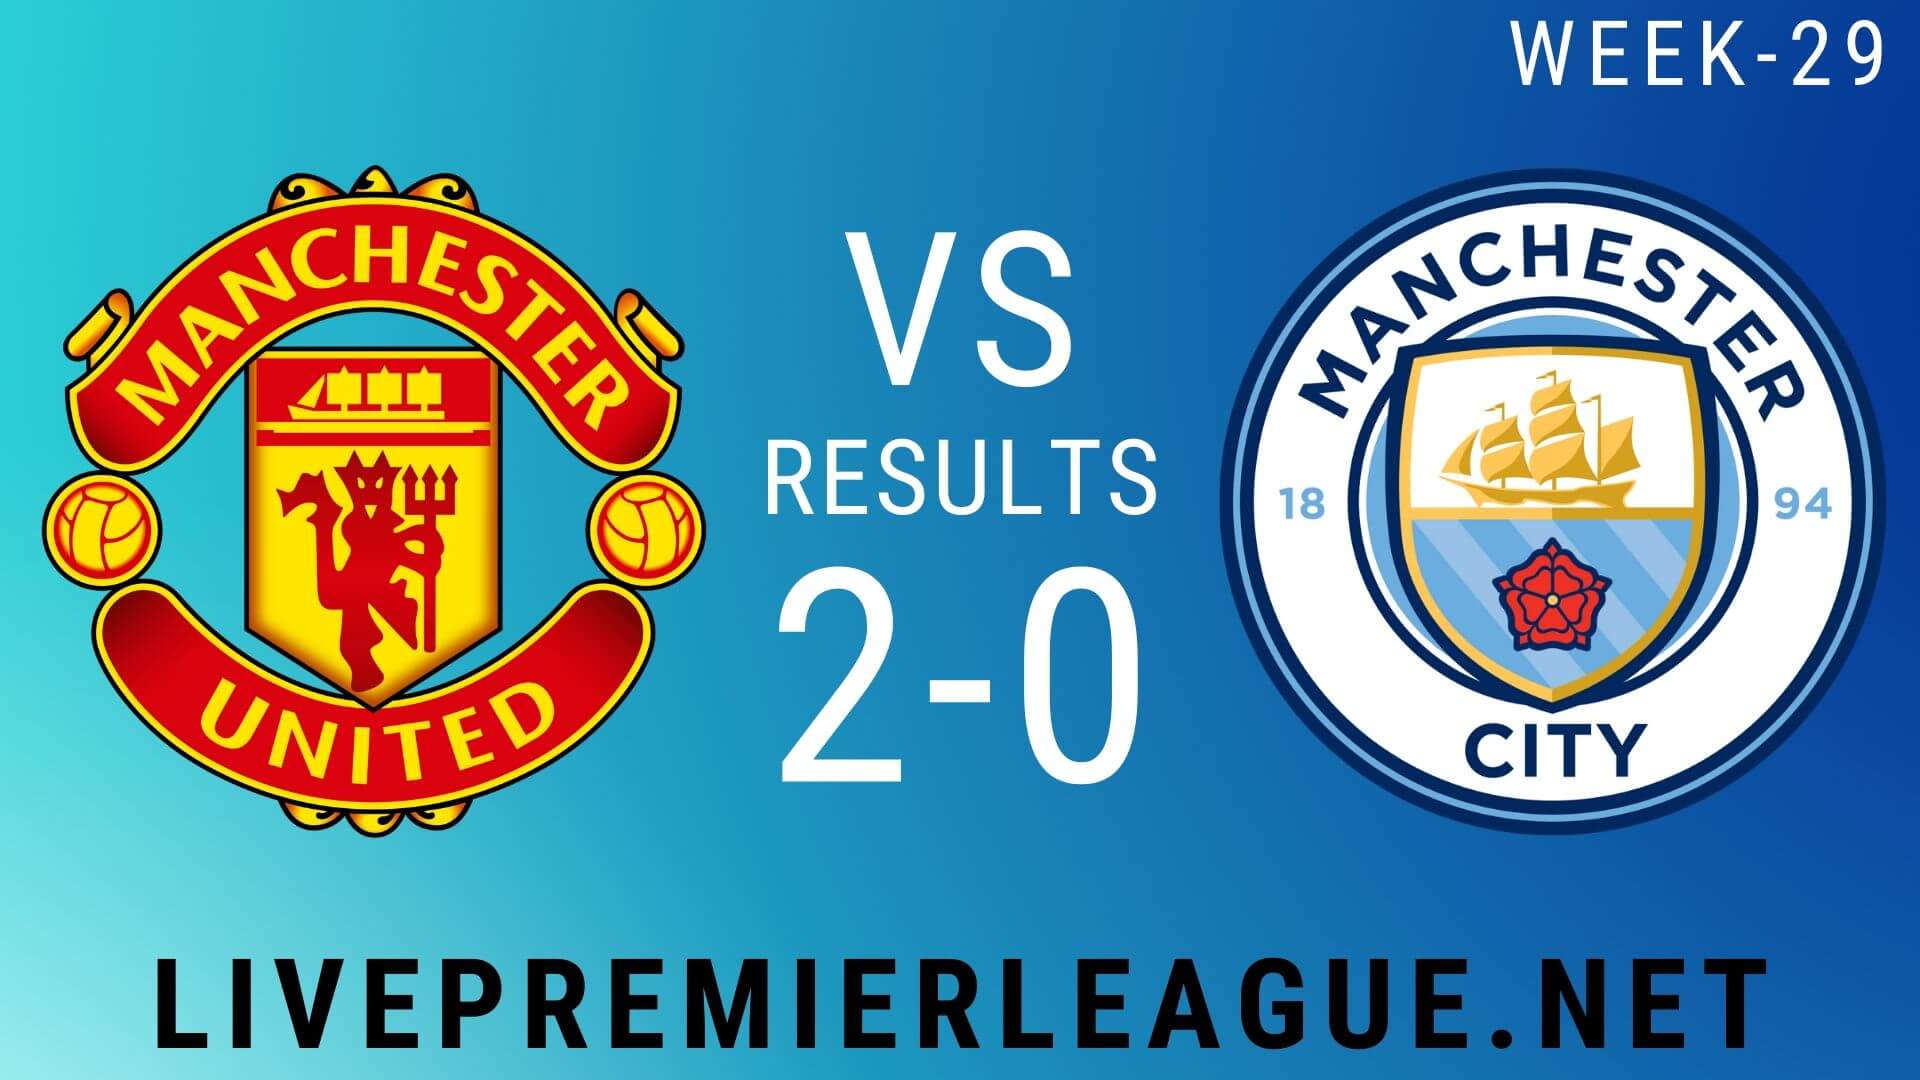 Manchester United Vs Manchester City | Week 29 Result 2020